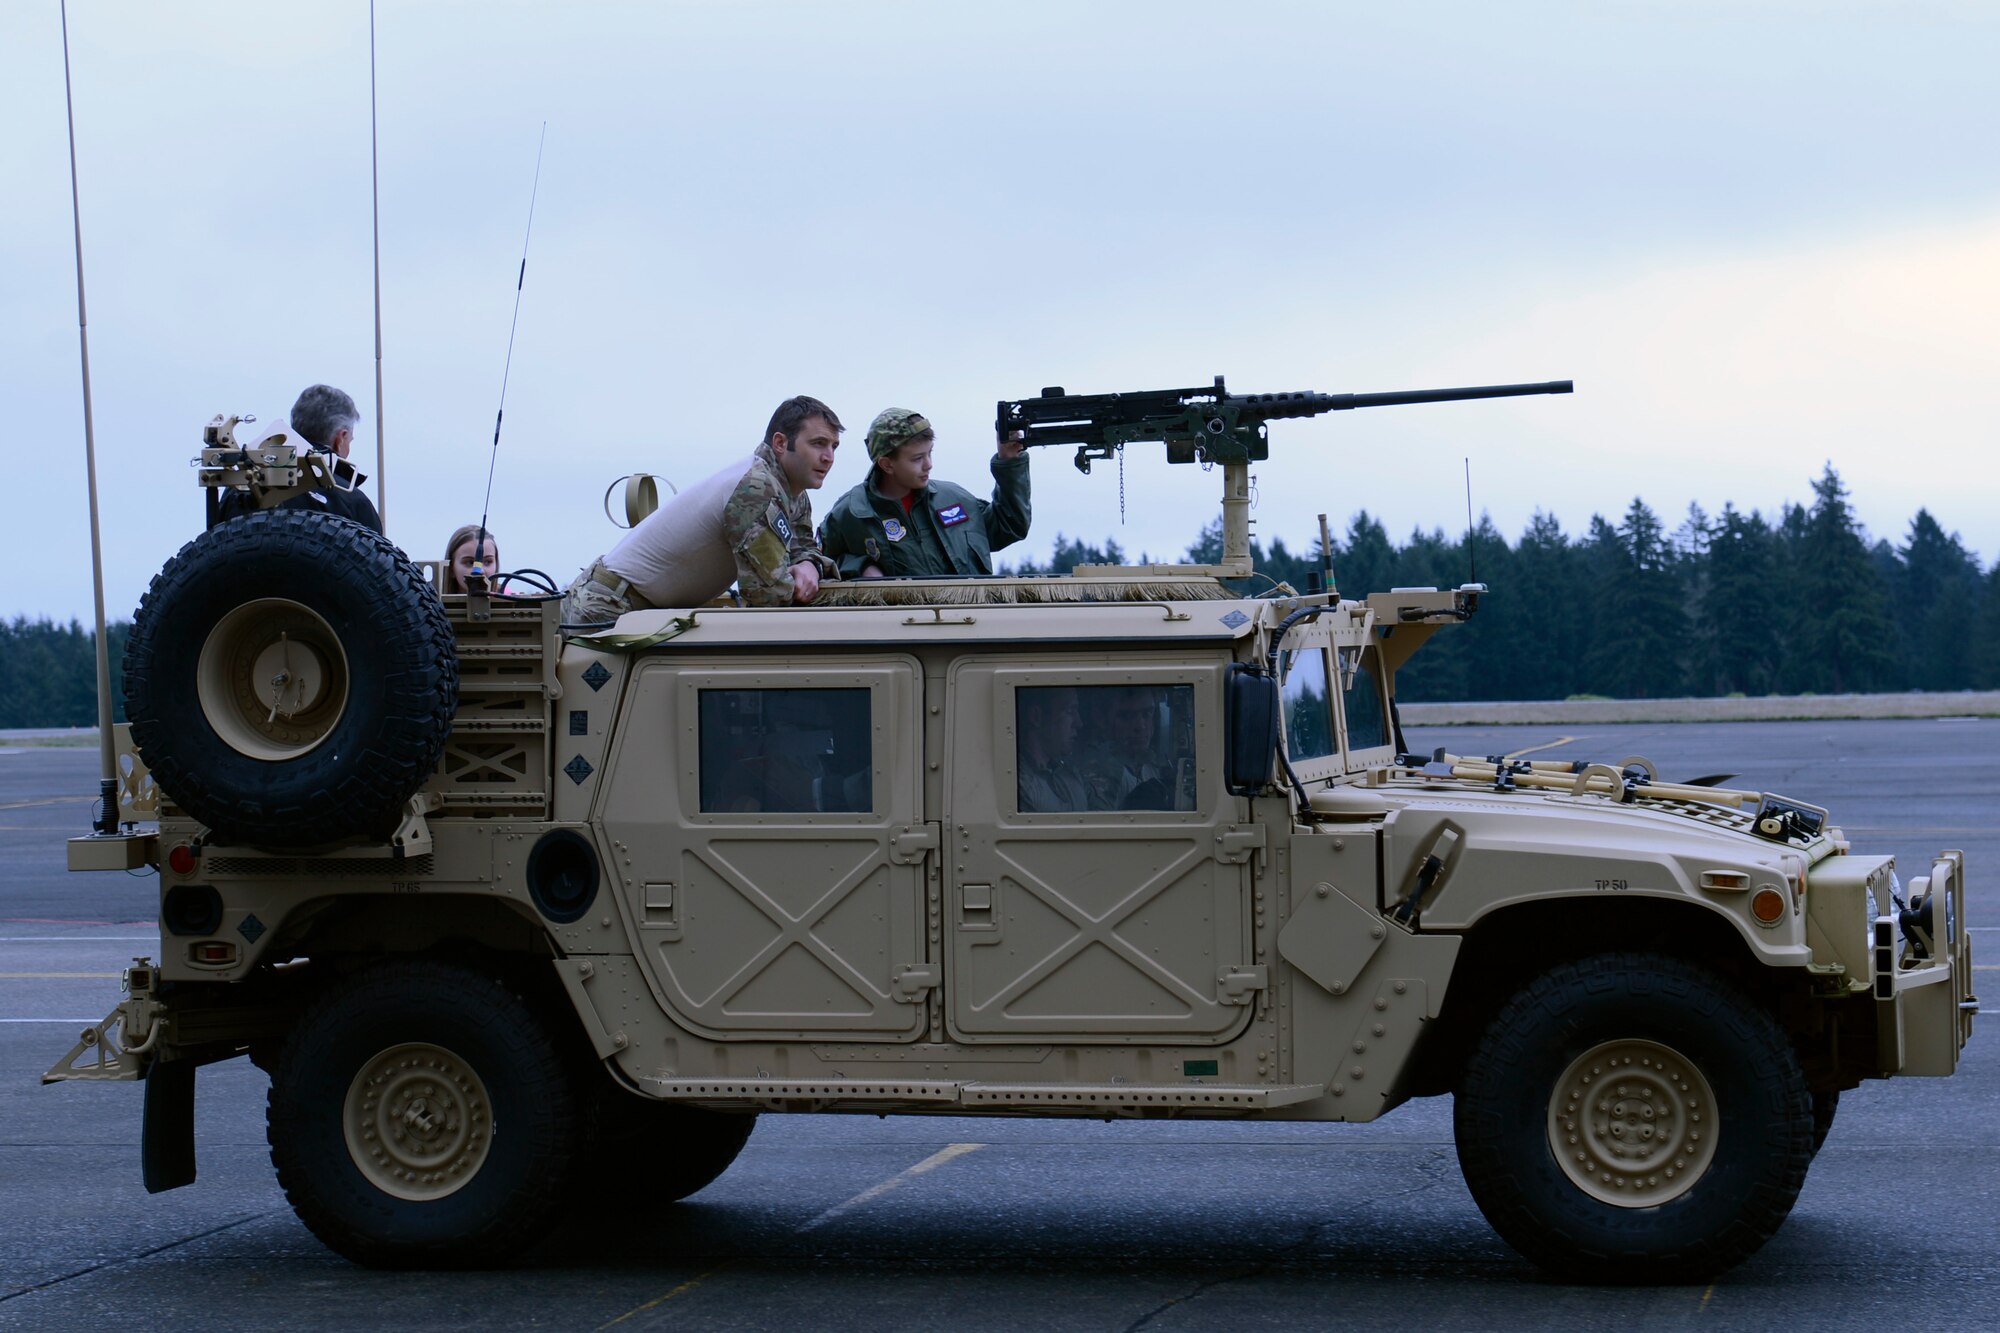 Carver Faull, McChord Field’s honorary Pilot for a Day, and his family take a ride on a Humvee, courtesy of the Airmen of the 22nd Special Tactics Squadron, Feb. 20, 2015, at Joint Base Lewis-McChord, Wash. “This event has been so important to us,” said Chief Master Sgt. Jeff Guilmain, 22nd STS superintendent. “We’re happy to be a part of it.” (U.S. Air Force photo/Senior Airman Rebecca Blossom)